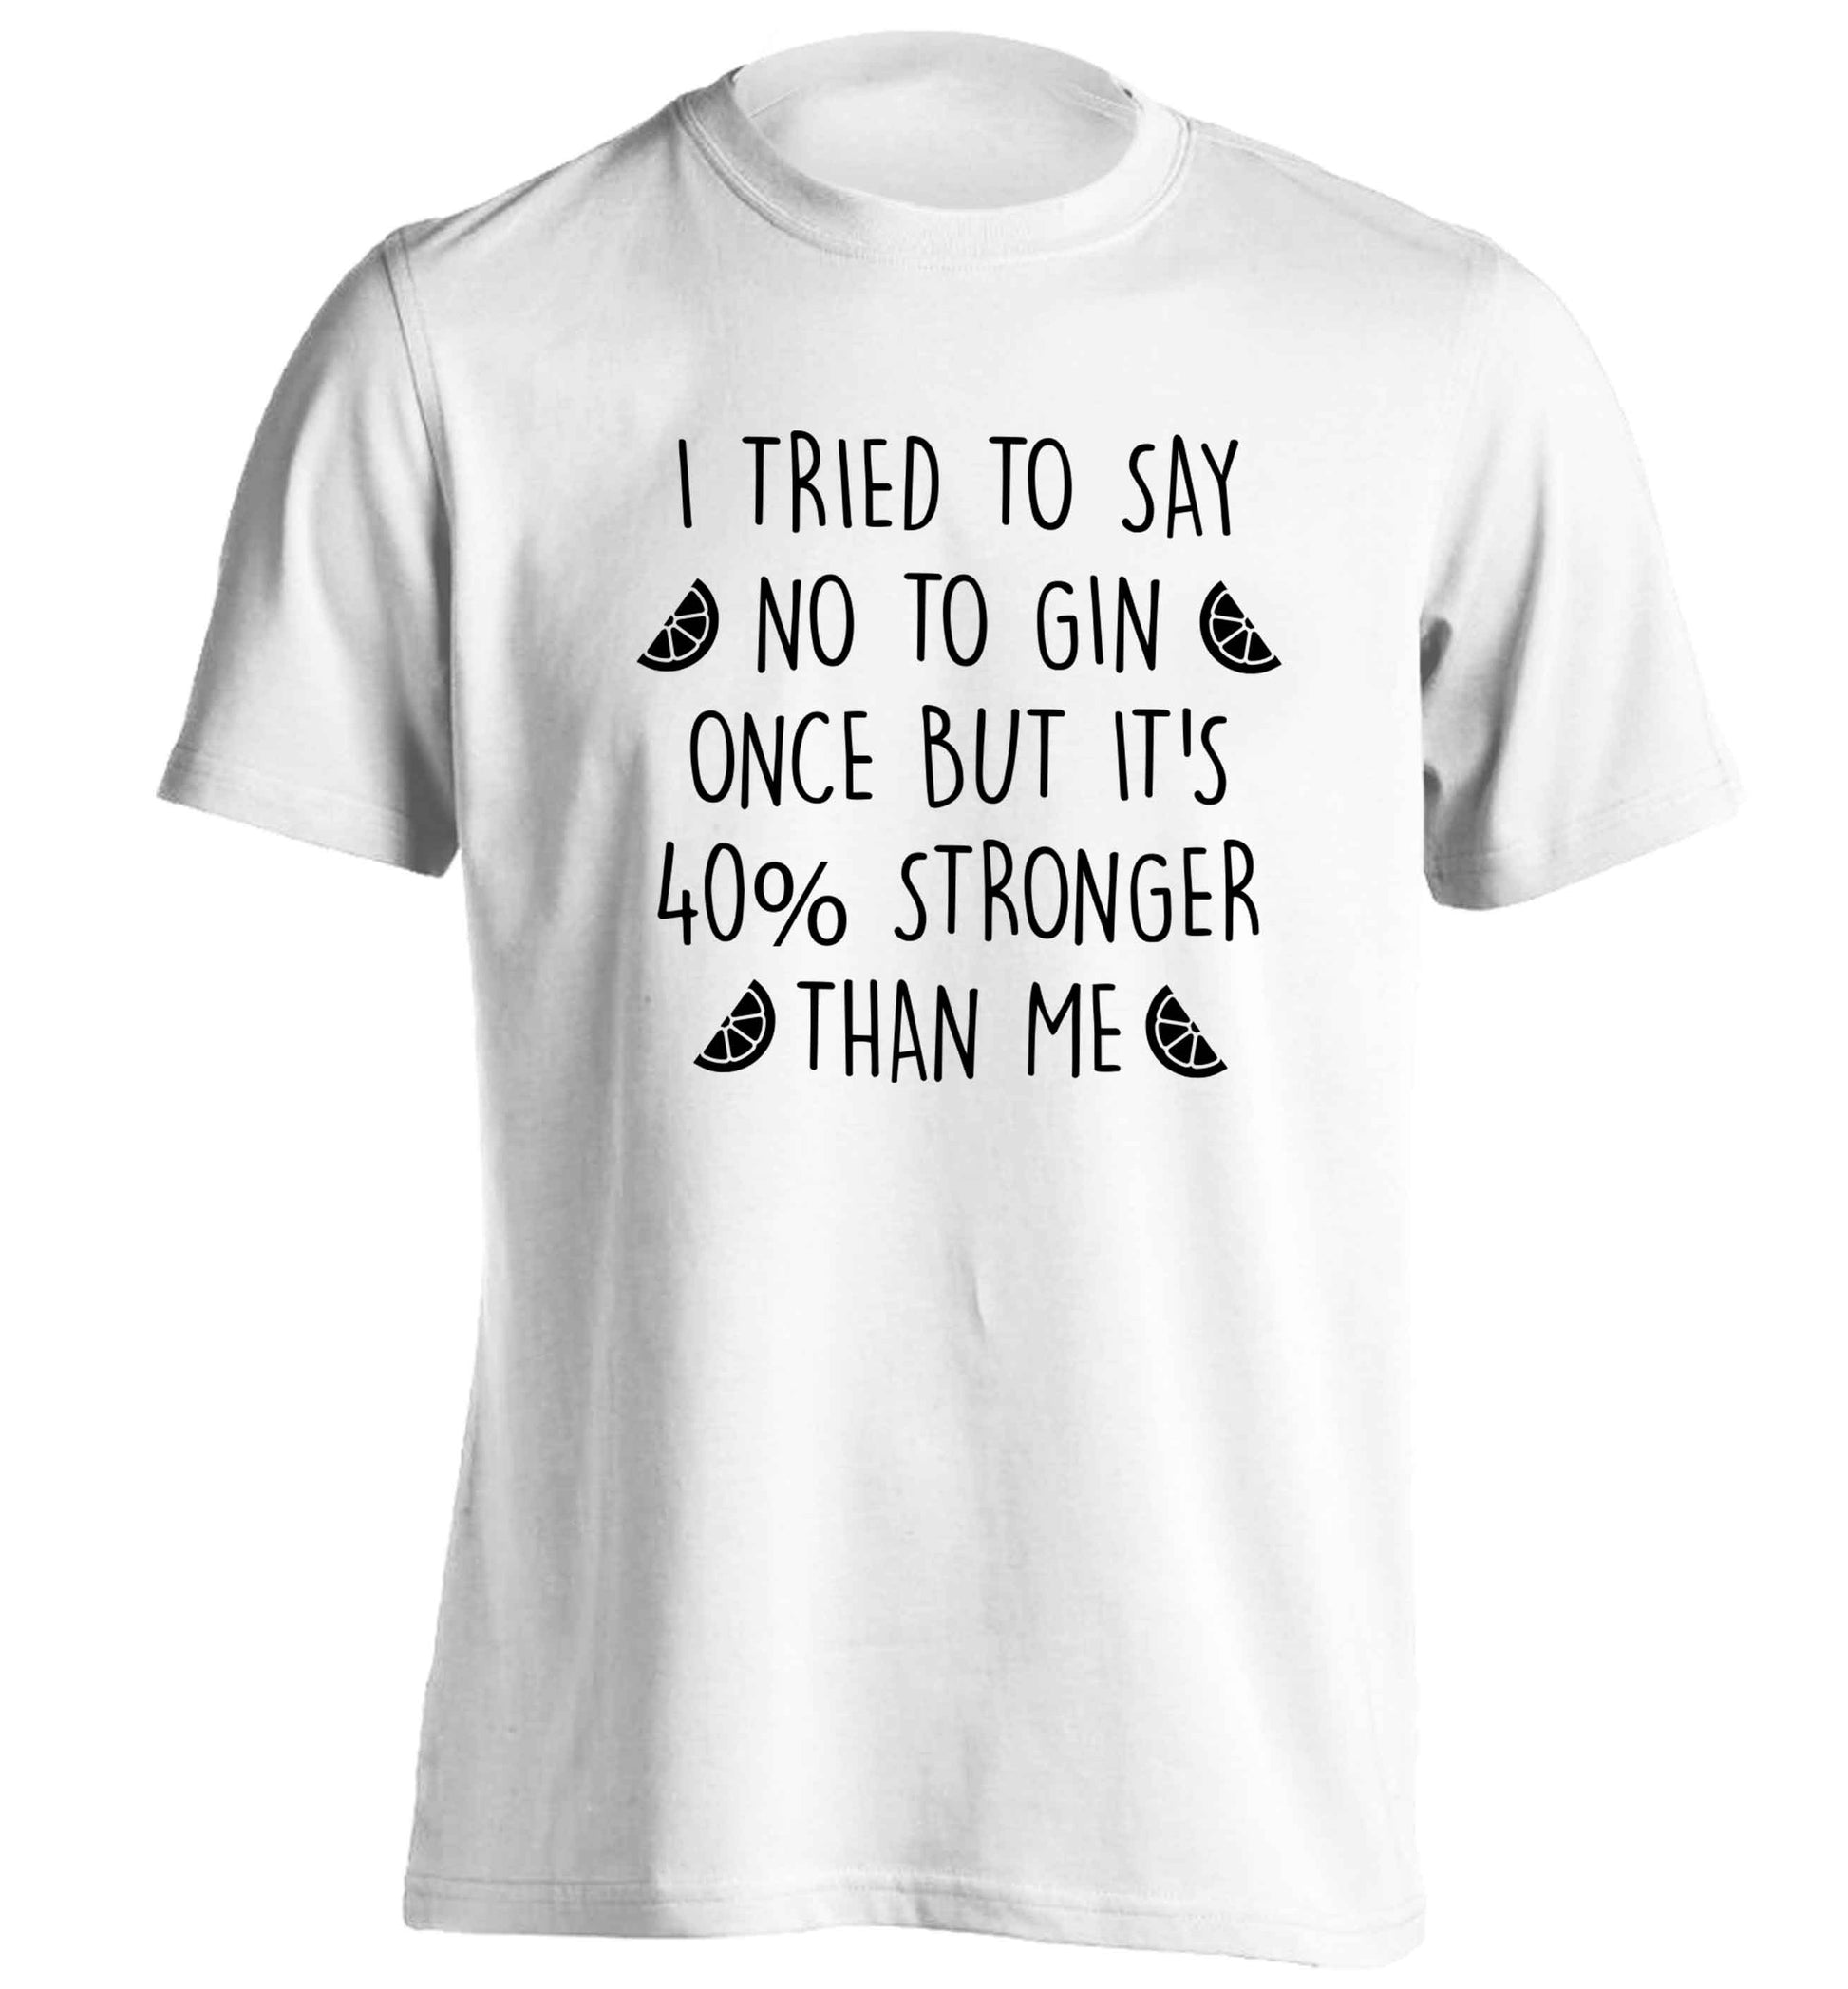 I tried to say no to gin once but it's 40% stronger than me adults unisex white Tshirt 2XL